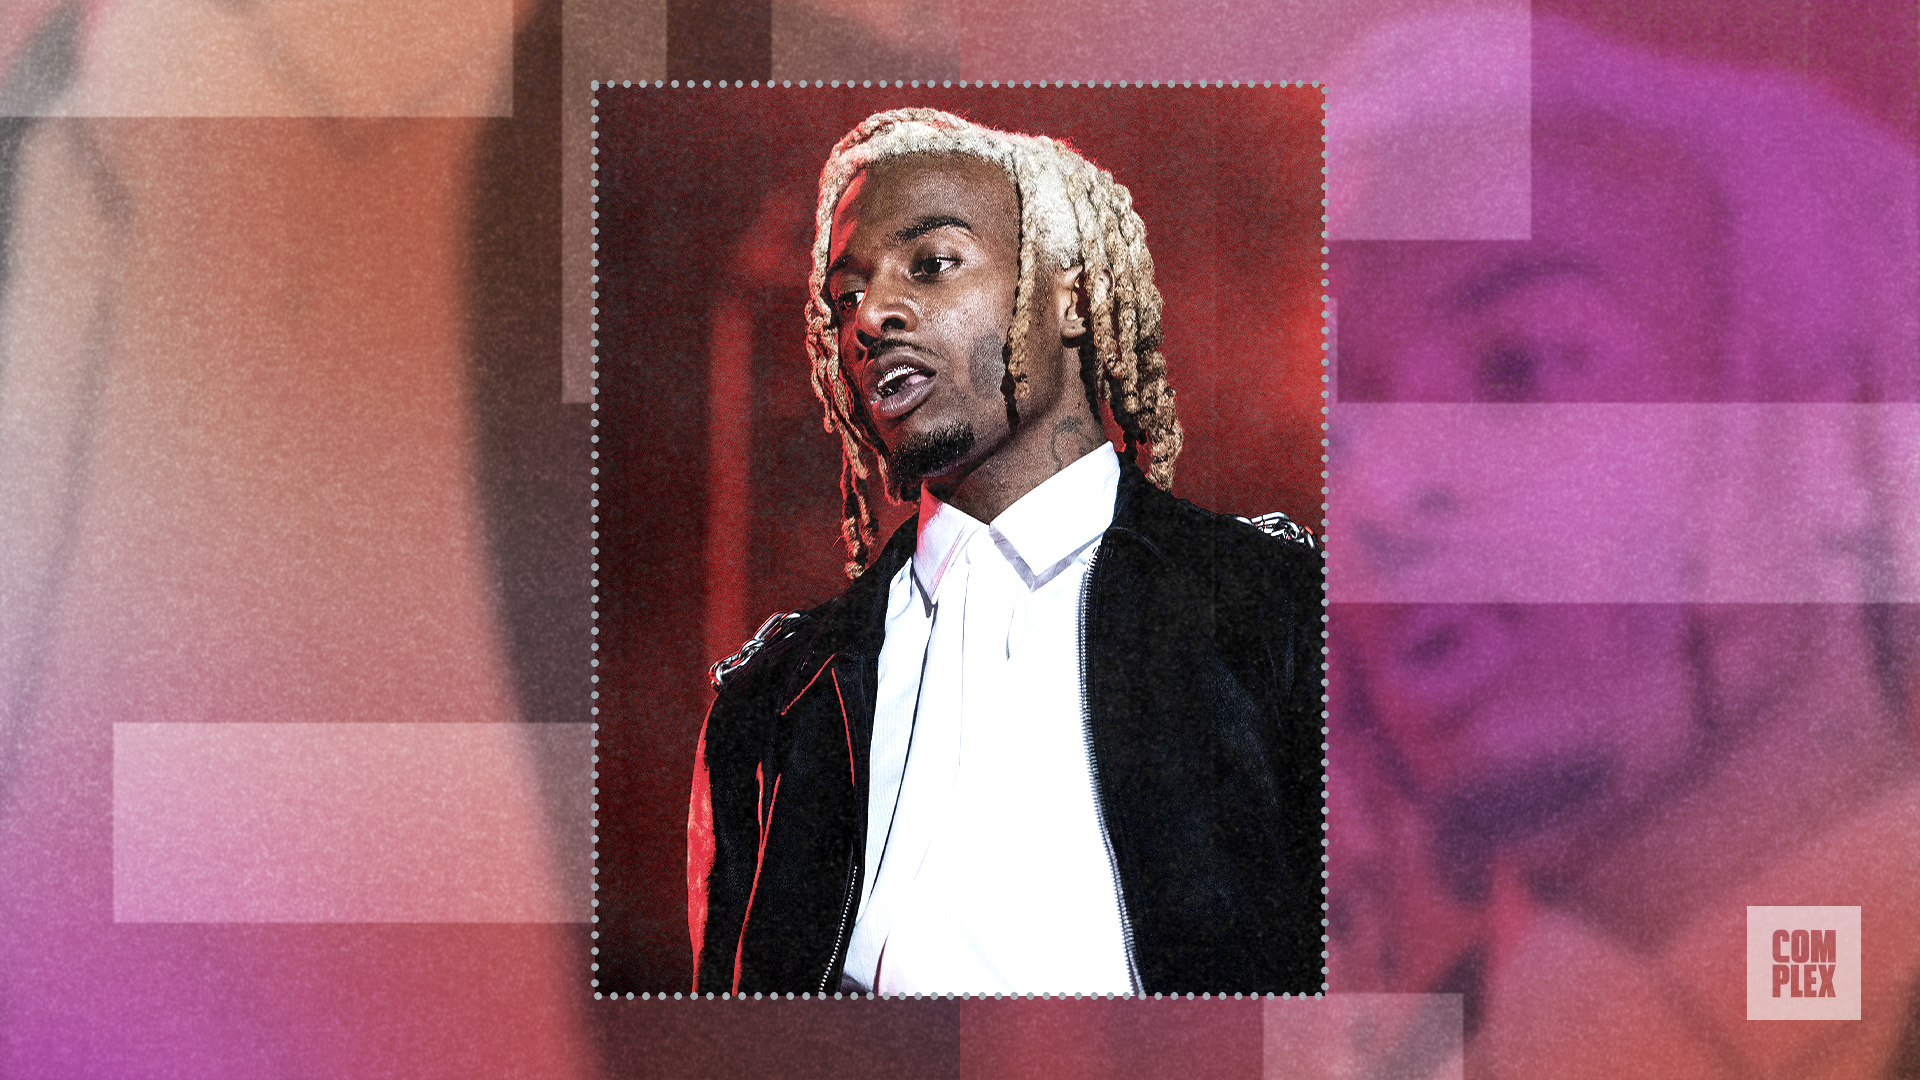 Playboi Carti: Best Rappers in Their 20s